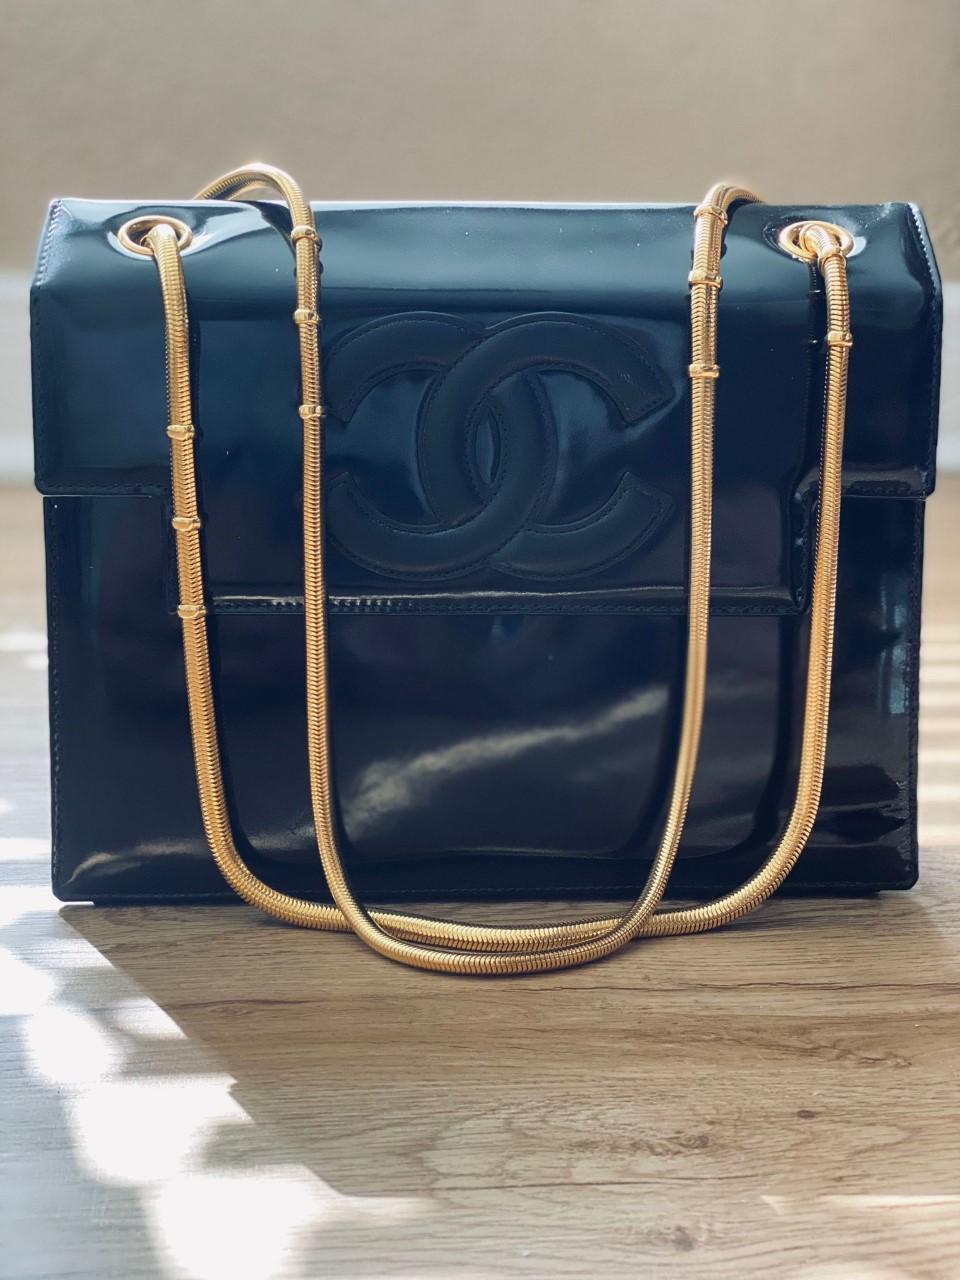 Excellent vintage condition
Minor scratches to interior lambskin flap lining
some minor knicks to patent leather 
Very rarely carried and always stored in dust bag 
Collectors dream rare show piece
Magnetic snap closure
Snake chain with ball details